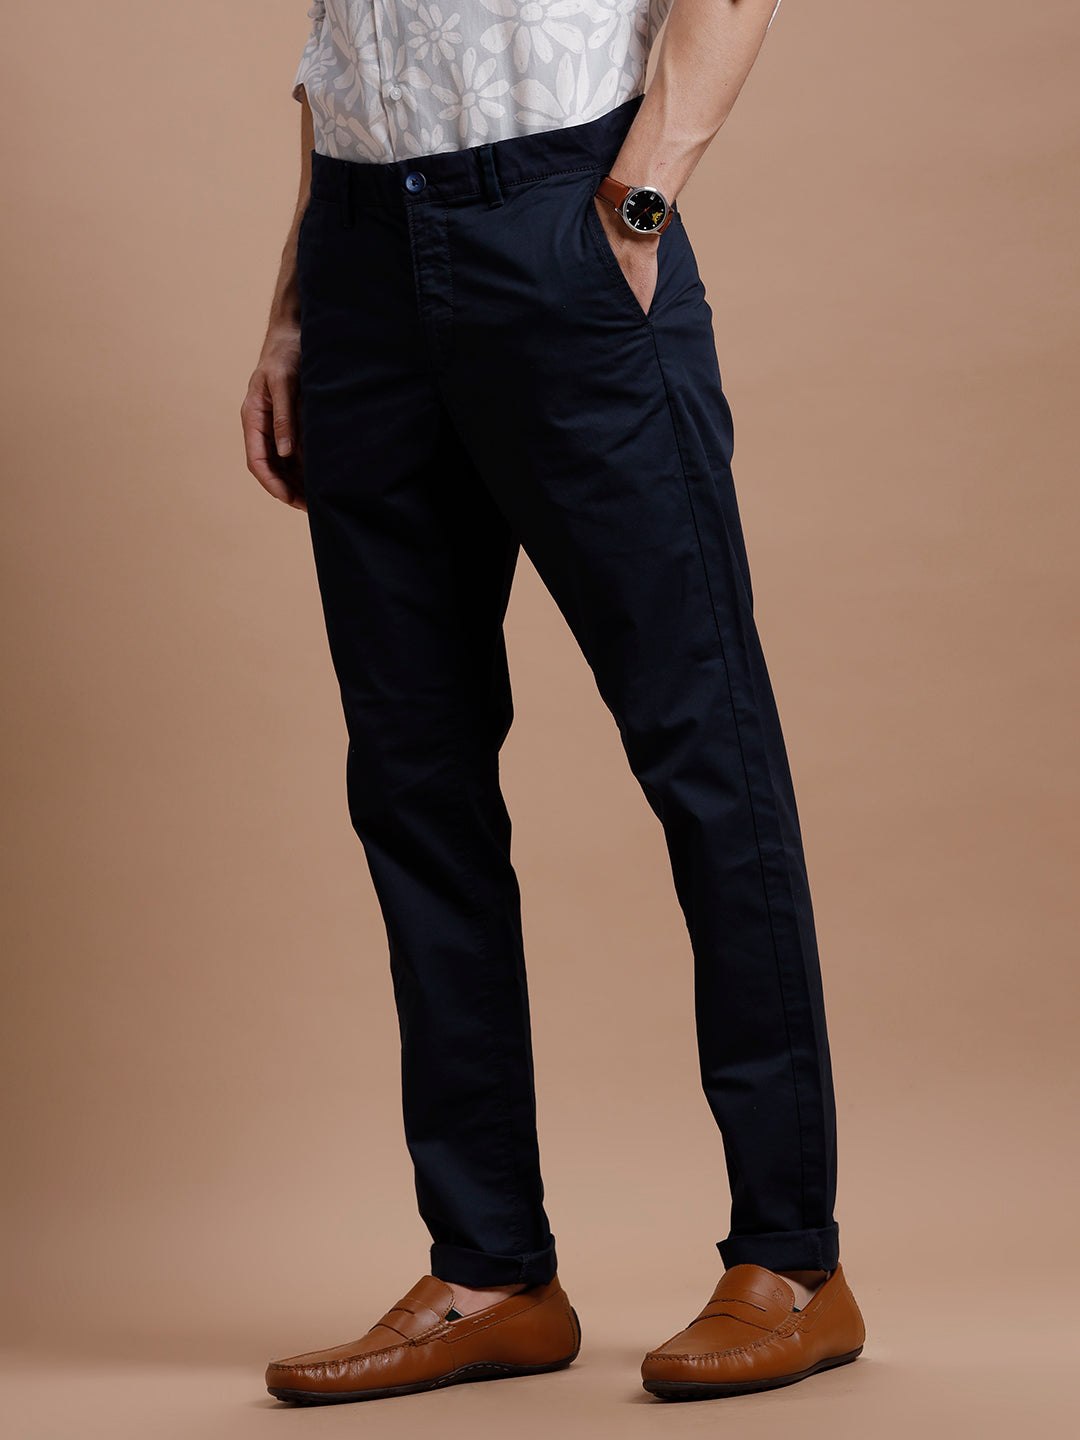 Navy  Smart Casual Cotton Trouser